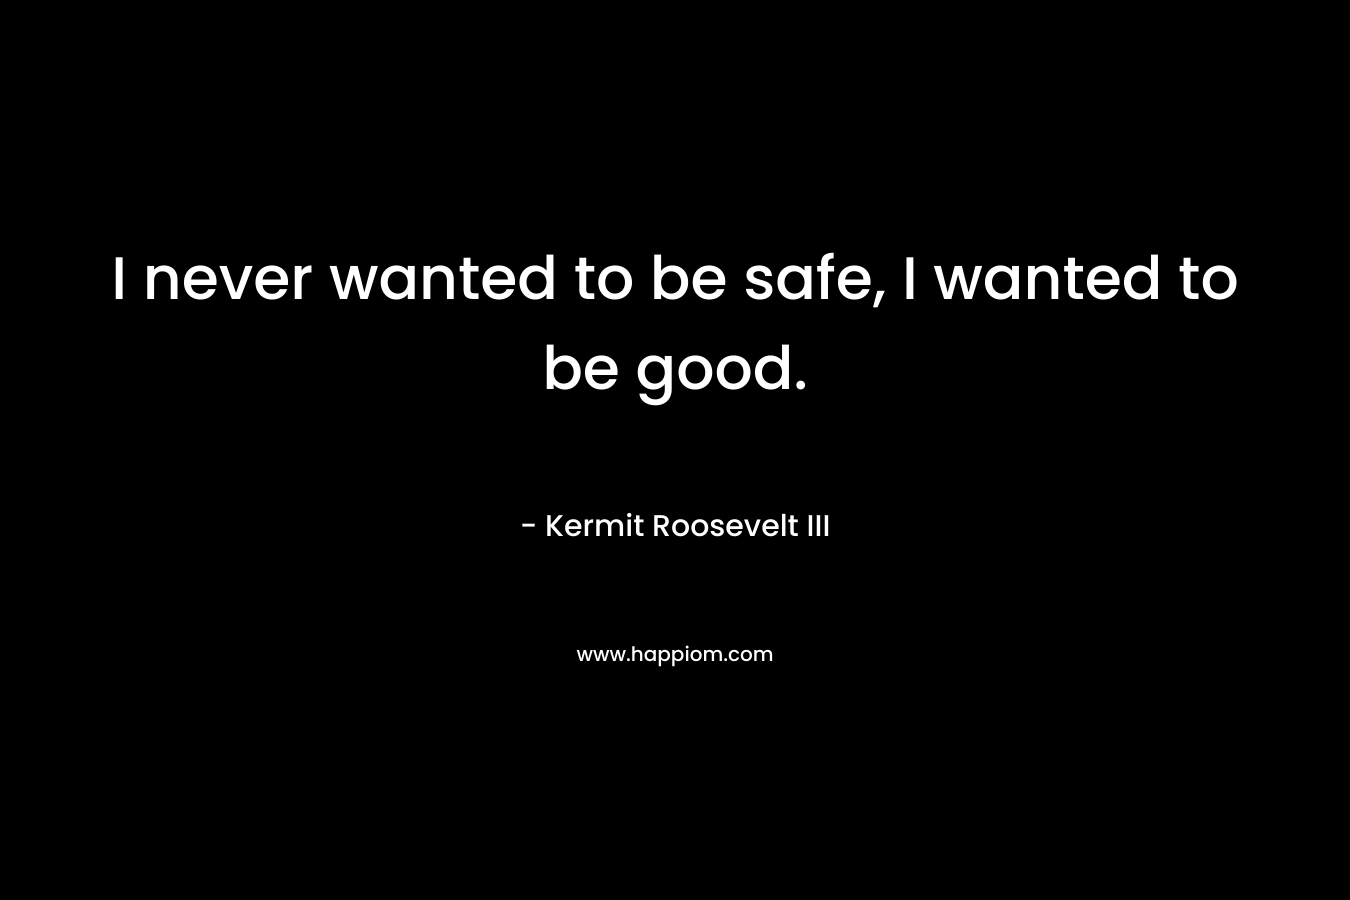 I never wanted to be safe, I wanted to be good.